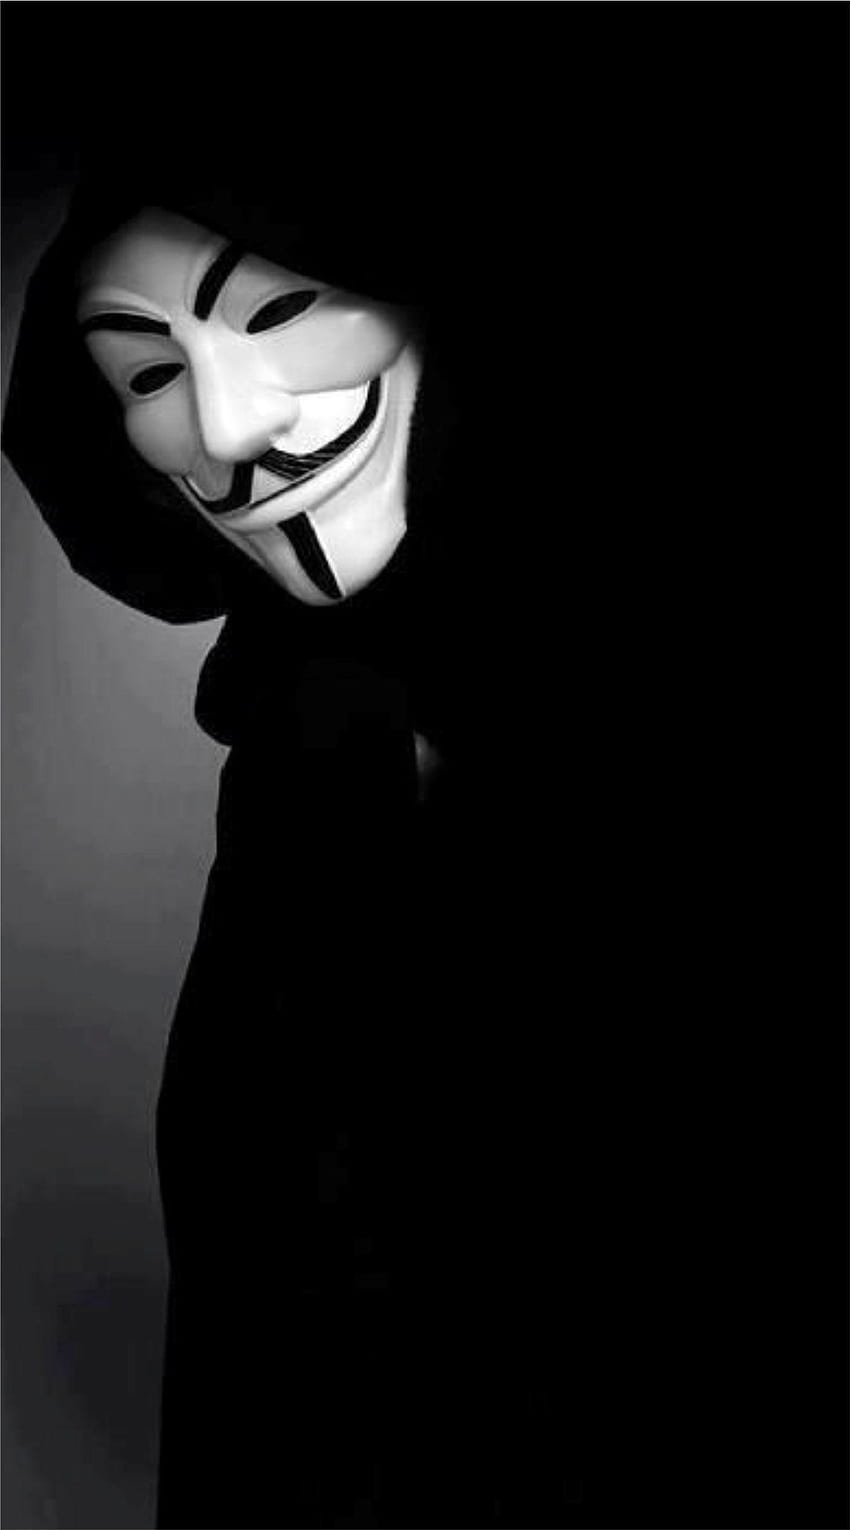 Download Wallpaper 1920x1080 censored, anonymous, mask Full HD 1080p HD  Background